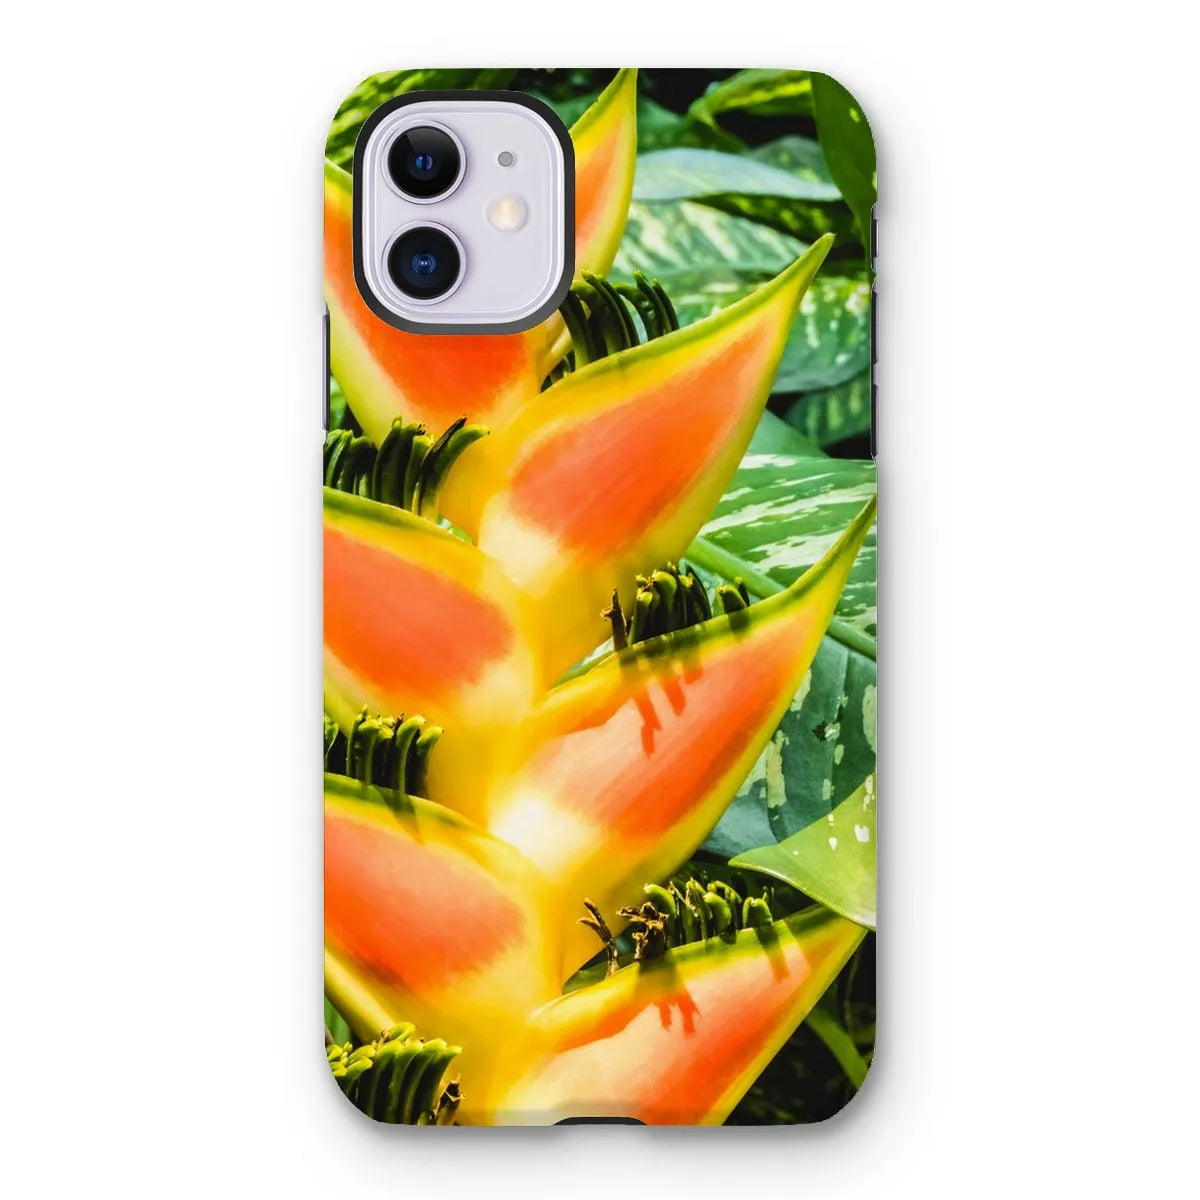 Showstopper Tough Phone Case - Iphone 11 / Matte - Mobile Phone Cases - Aesthetic Art